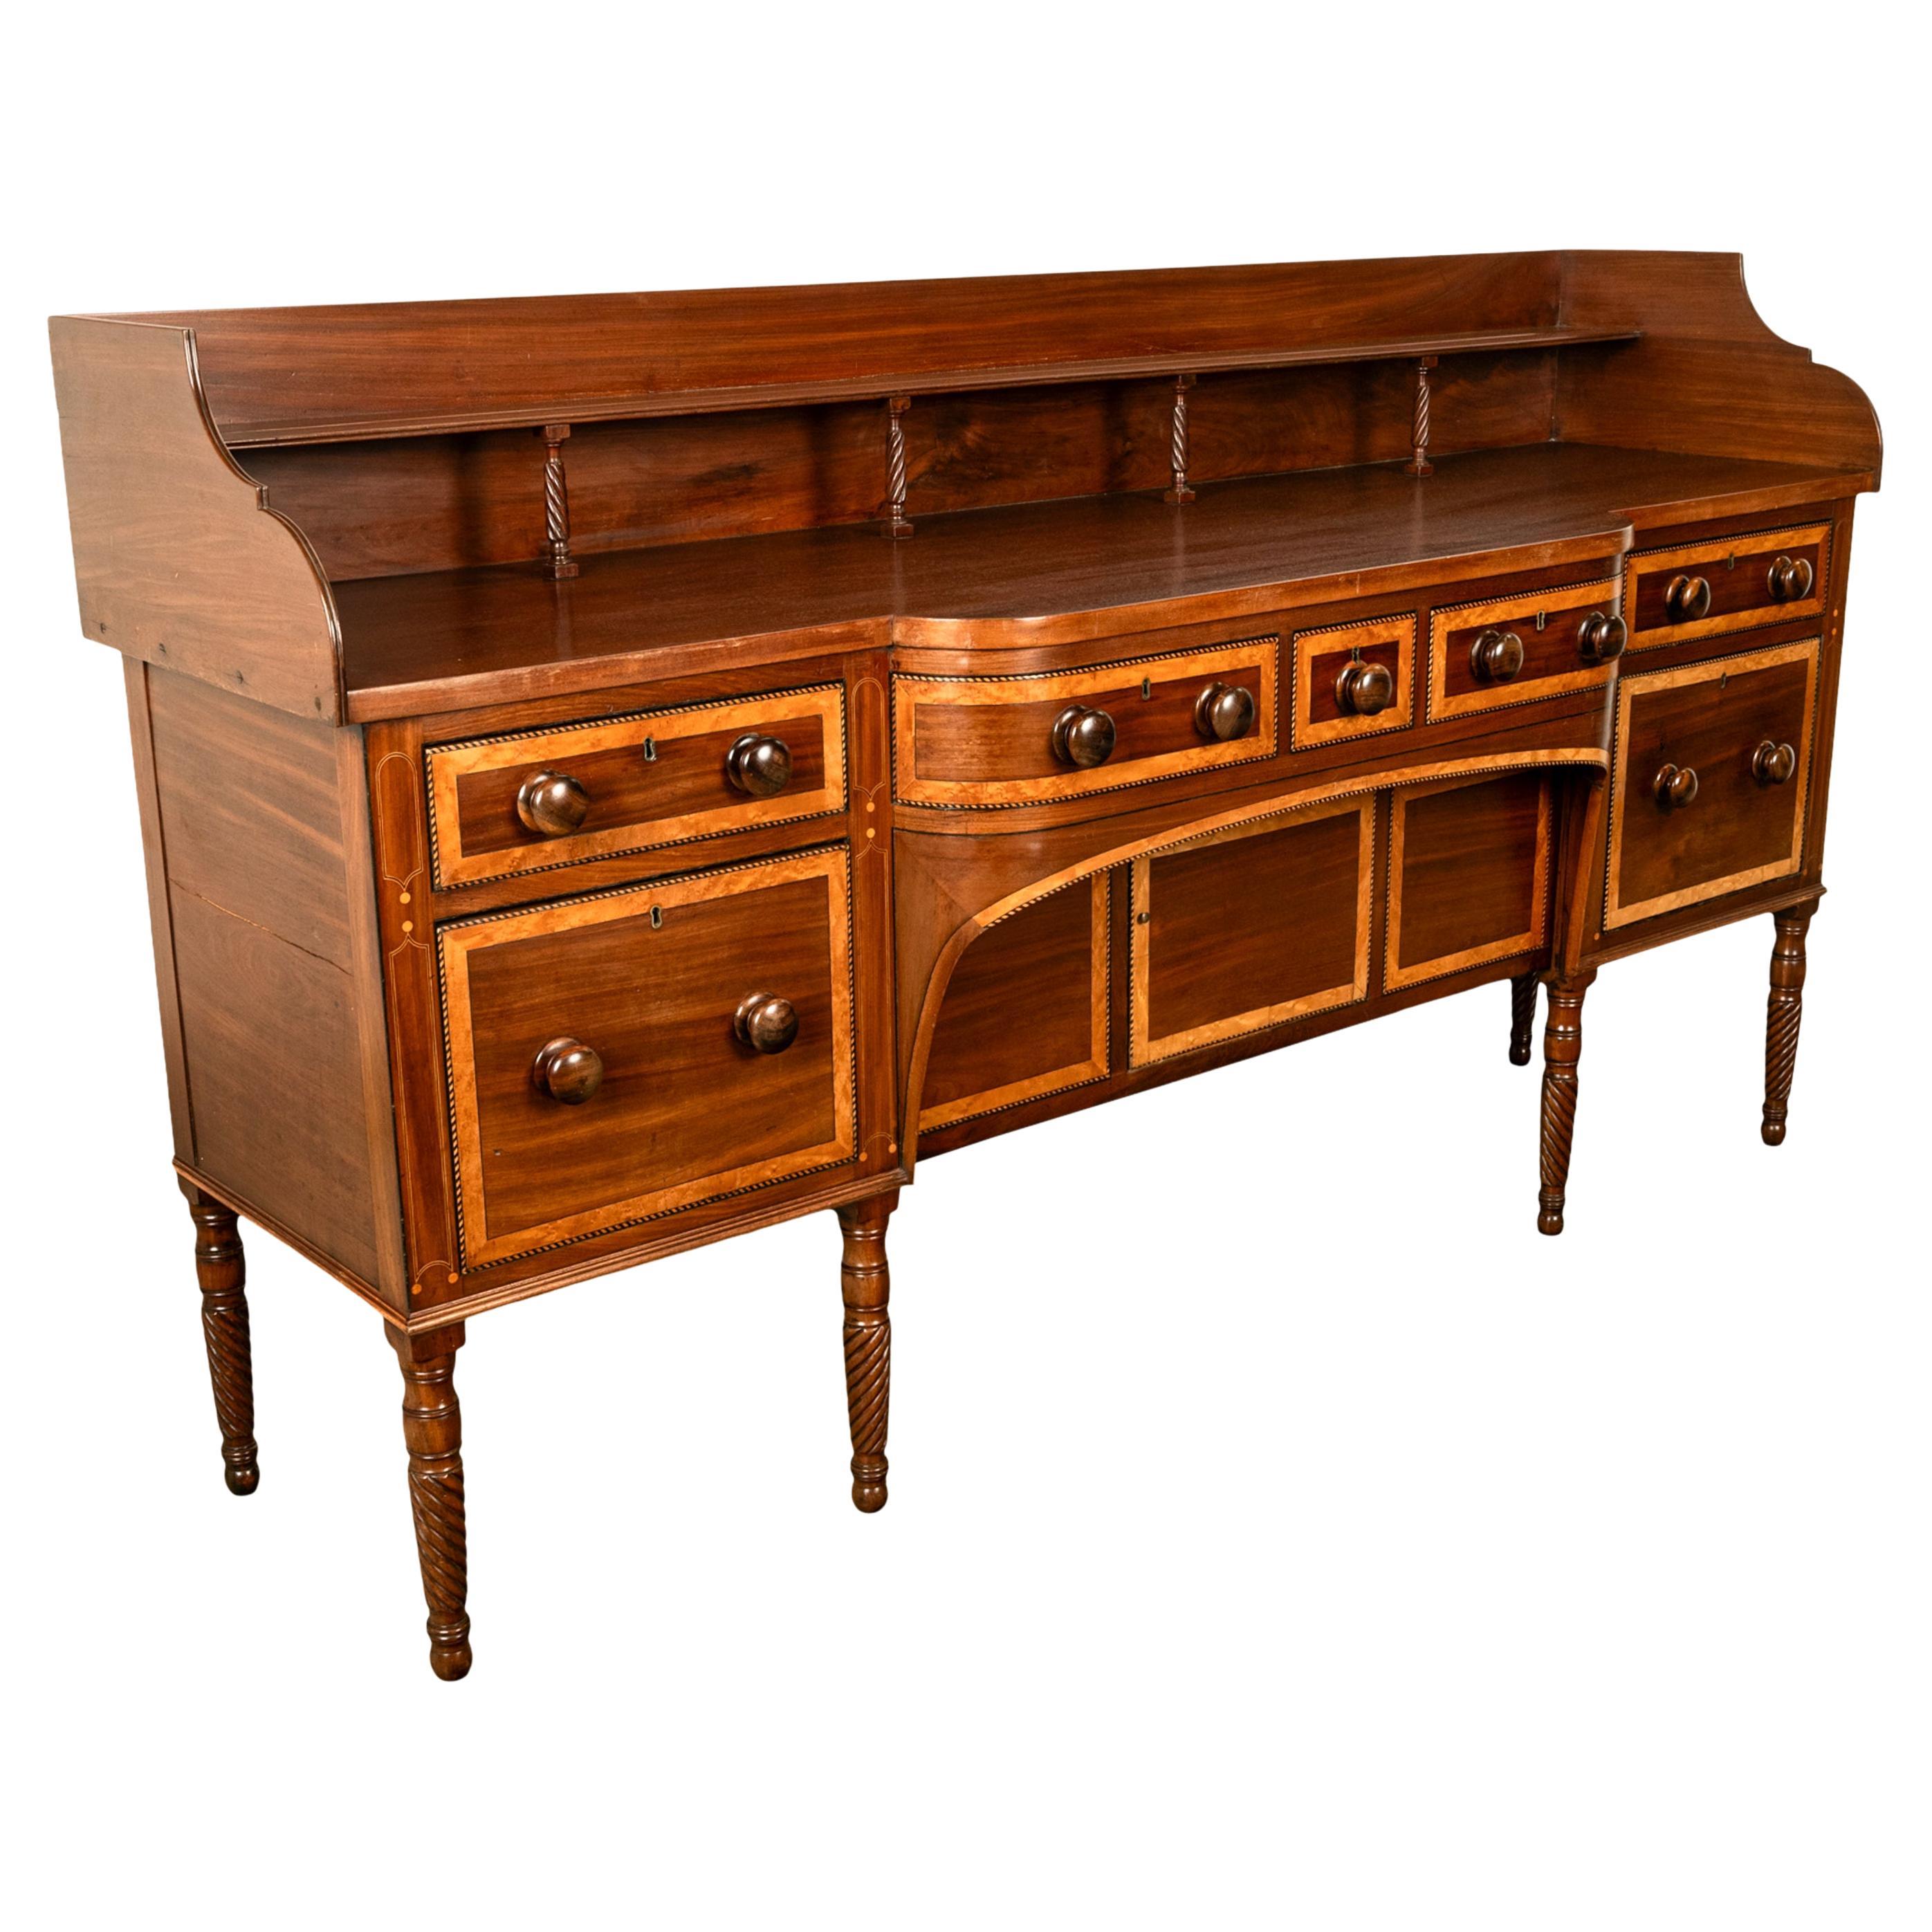 A fine antique Irish Georgian inlaid Cuban mahogany Country House sideboard, Donegal, circa 1800.
The sideboard came from a fine country house in Donegal and by repute from Buncrana Castle, the sideboard is of unusually large size at almost 7.5'